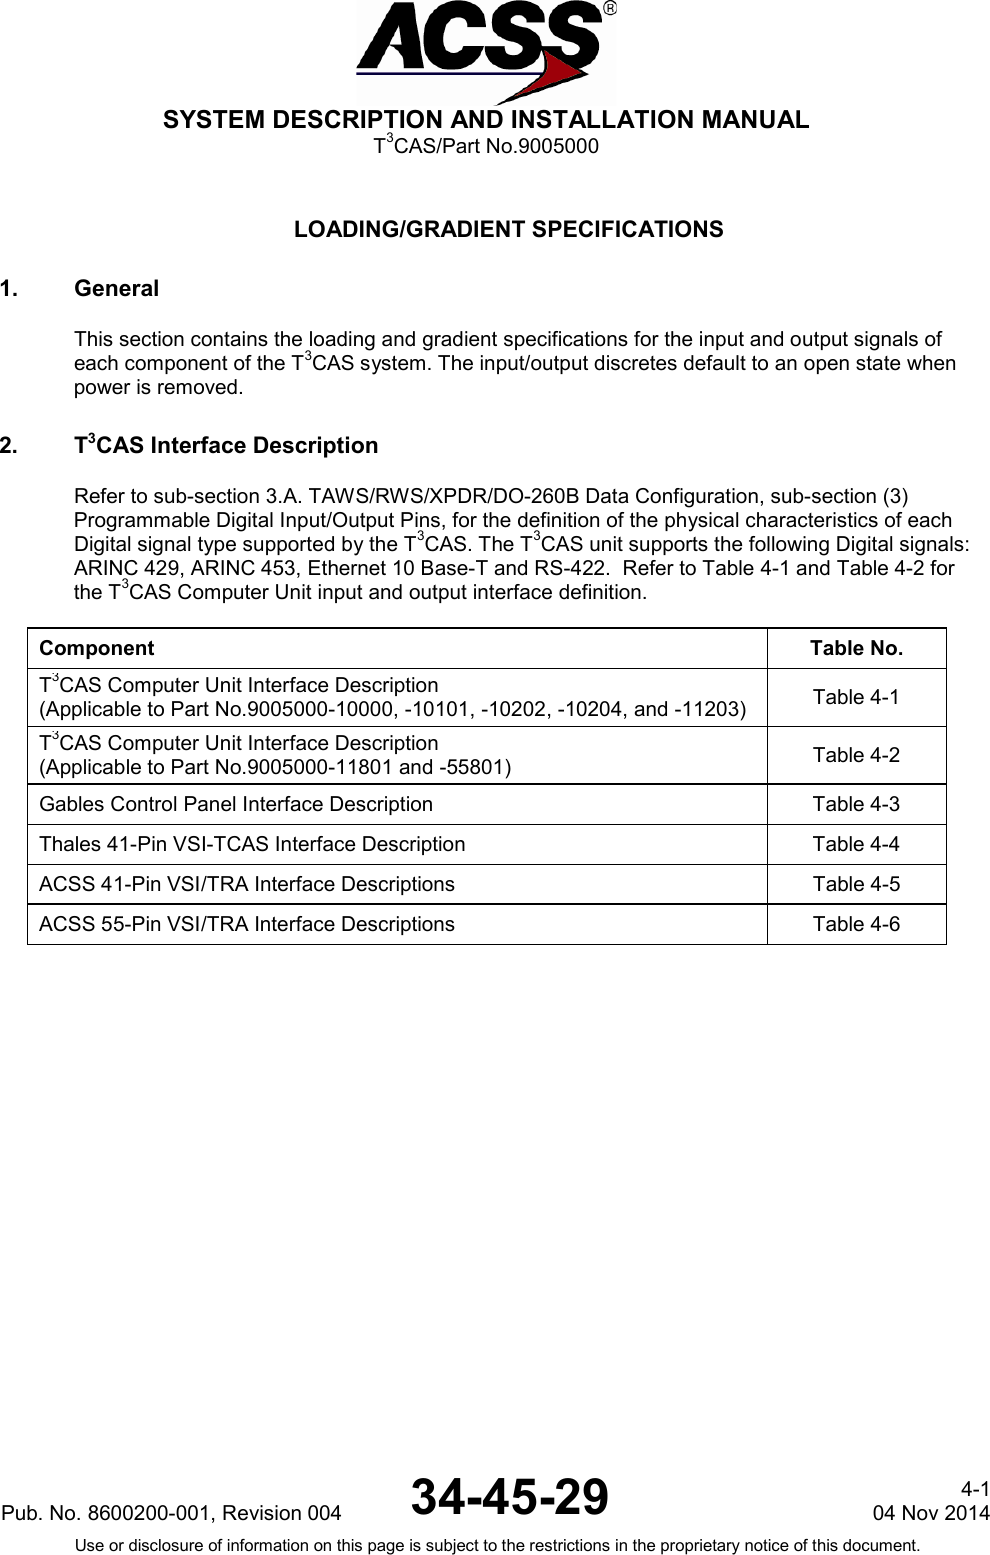  SYSTEM DESCRIPTION AND INSTALLATION MANUAL T3CAS/Part No.9005000  LOADING/GRADIENT SPECIFICATIONS 1. General This section contains the loading and gradient specifications for the input and output signals of each component of the T3CAS system. The input/output discretes default to an open state when power is removed. 2.  T3CAS Interface Description Refer to sub-section 3.A. TAWS/RWS/XPDR/DO-260B Data Configuration, sub-section (3) Programmable Digital Input/Output Pins, for the definition of the physical characteristics of each Digital signal type supported by the T3CAS. The T3CAS unit supports the following Digital signals: ARINC 429, ARINC 453, Ethernet 10 Base-T and RS-422.  Refer to Table 4-1 and Table 4-2 for the T3CAS Computer Unit input and output interface definition.  Component Table No. T3CAS Computer Unit Interface Description  (Applicable to Part No.9005000-10000, -10101, -10202, -10204, and -11203) Table 4-1 T3CAS Computer Unit Interface Description (Applicable to Part No.9005000-11801 and -55801) Table 4-2 Gables Control Panel Interface Description Table 4-3 Thales 41-Pin VSI-TCAS Interface Description Table 4-4 ACSS 41-Pin VSI/TRA Interface Descriptions Table 4-5 ACSS 55-Pin VSI/TRA Interface Descriptions Table 4-6 Pub. No. 8600200-001, Revision 004 34-45-29 4-1 04 Nov 2014 Use or disclosure of information on this page is subject to the restrictions in the proprietary notice of this document.   